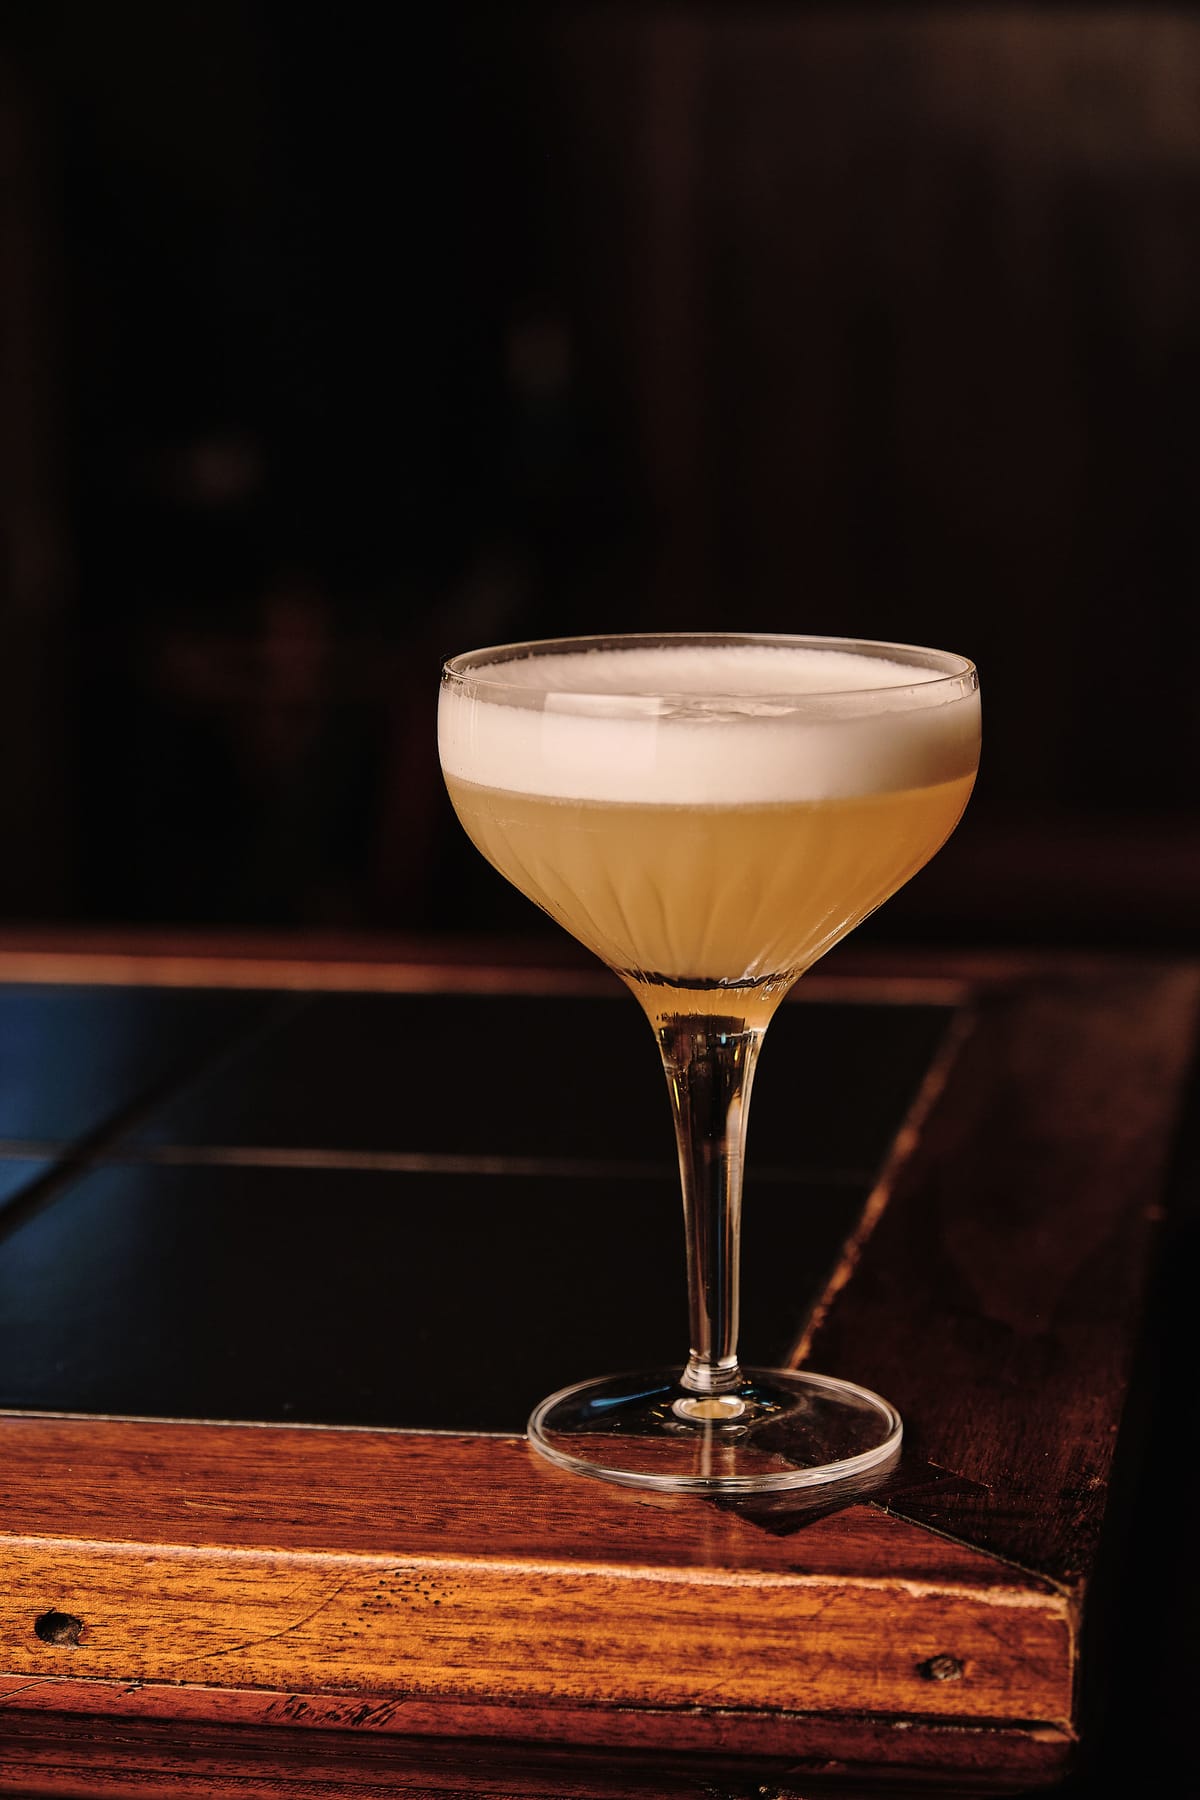 Get the recipe for the Honey Bee at Foxtrot Unicorn